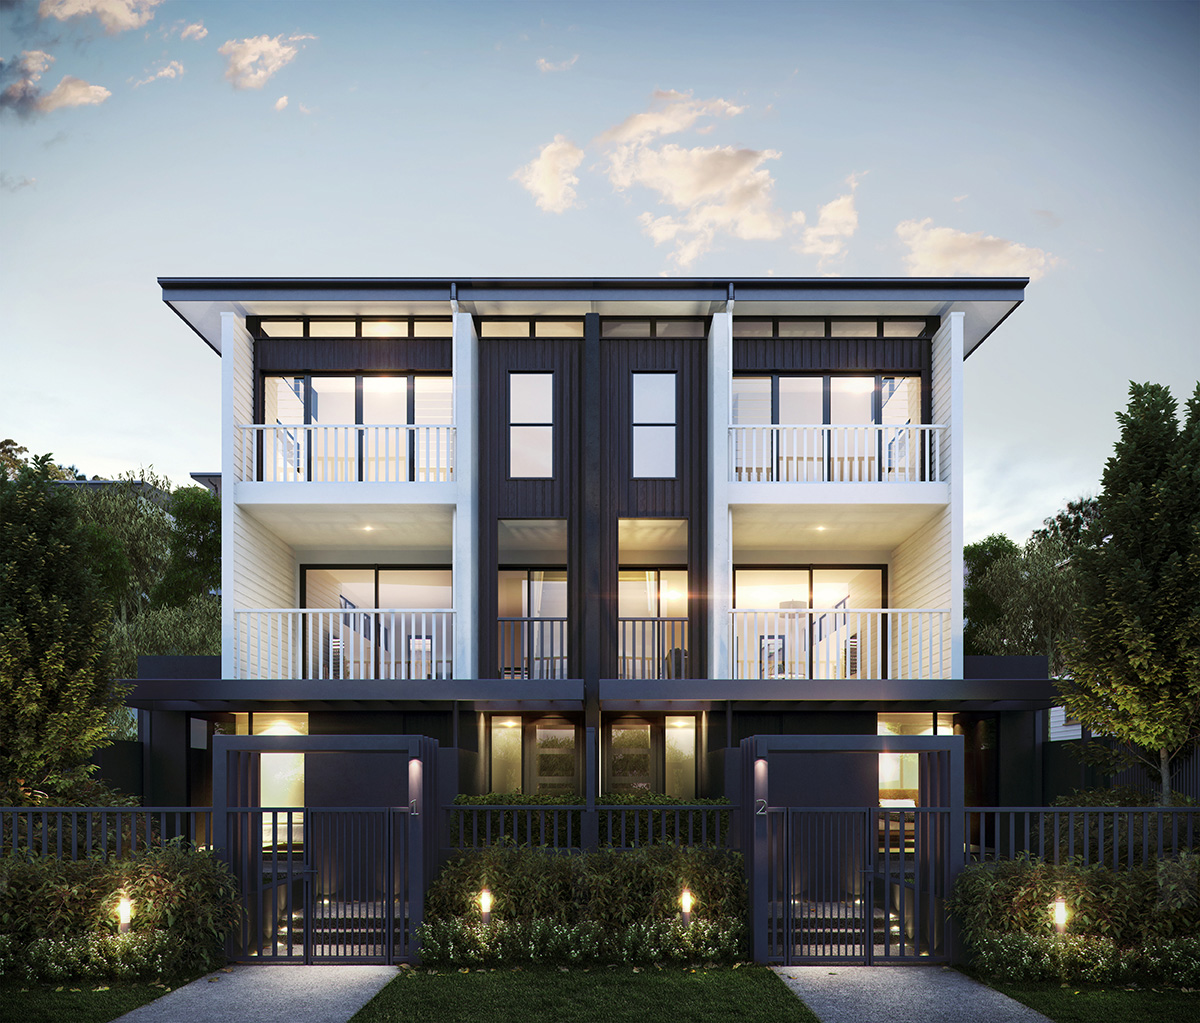 Exterior view of a three-story townhouse featuring balconies on the second and third levels. The house showcases a sleek black and white color scheme, exuding a modern and premium aesthetic.